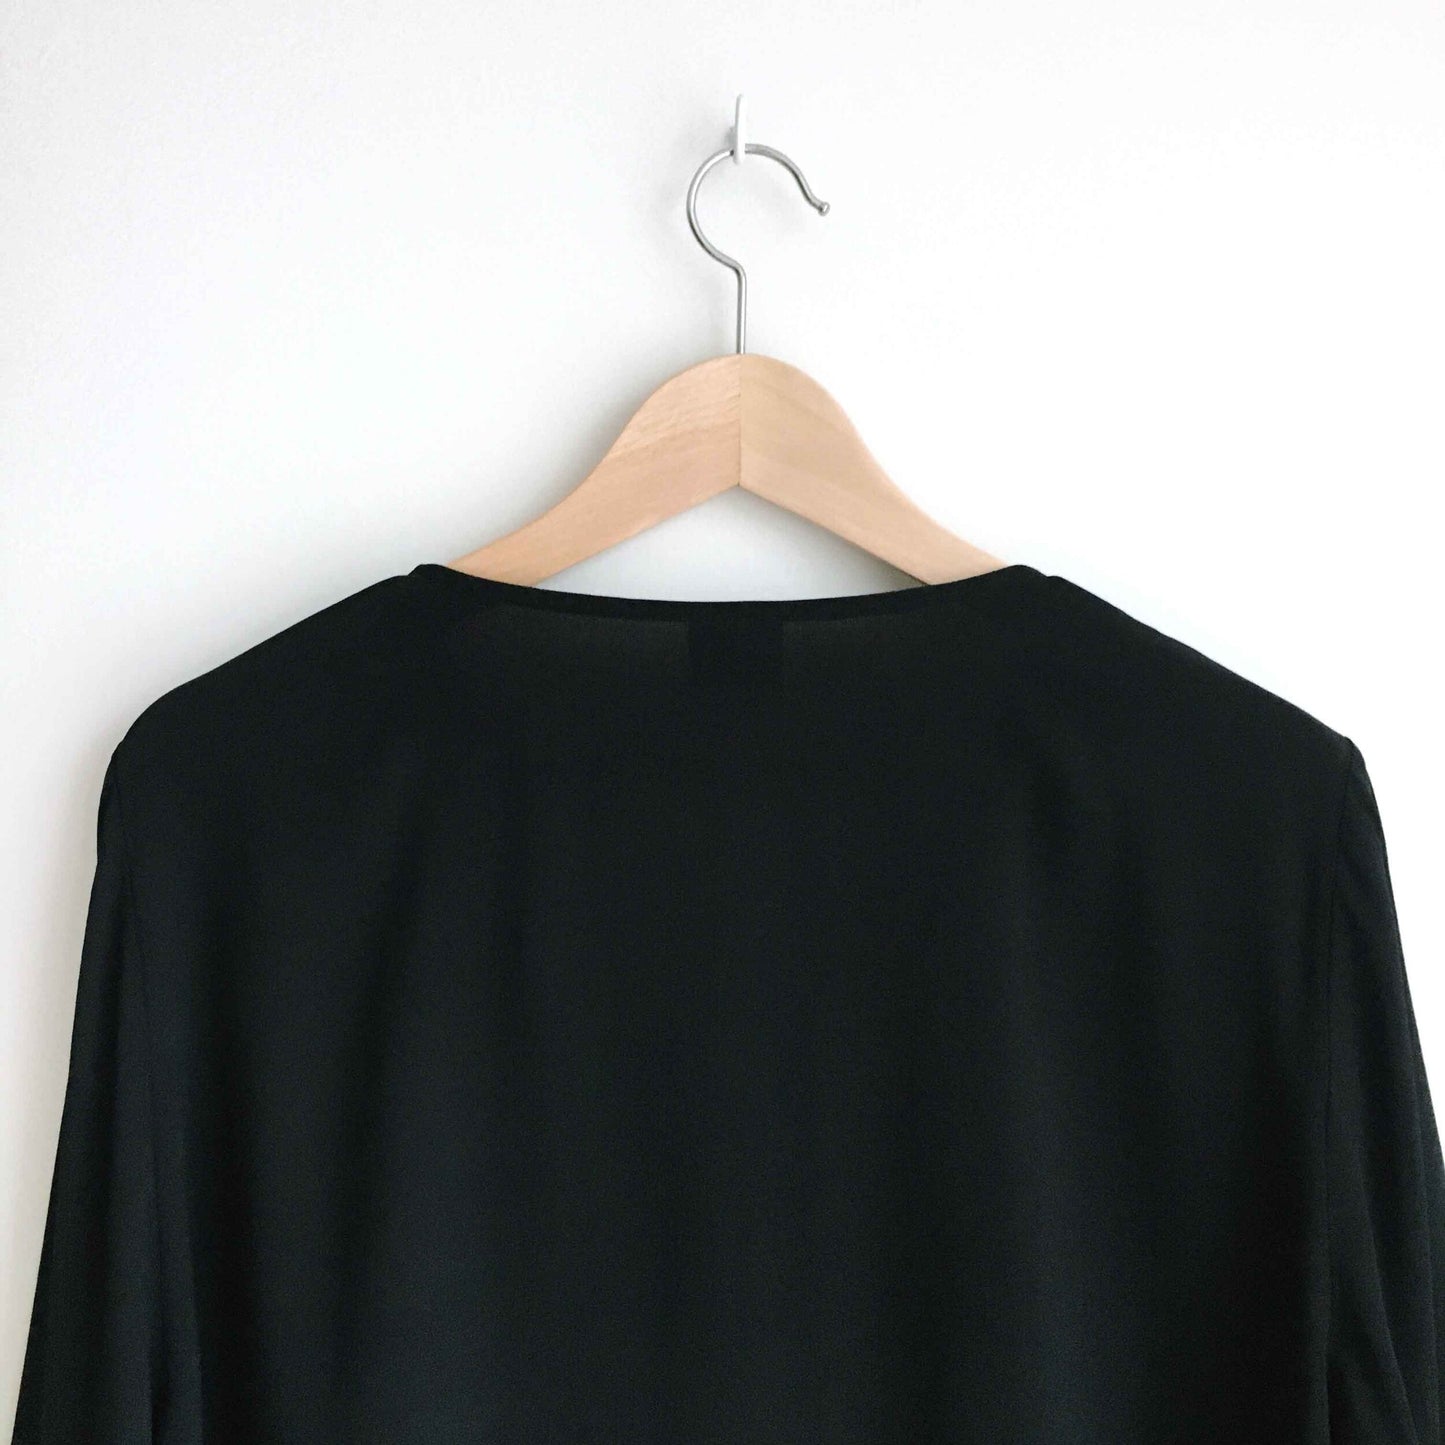 Eileen Fisher silk stretch button down top - size Large